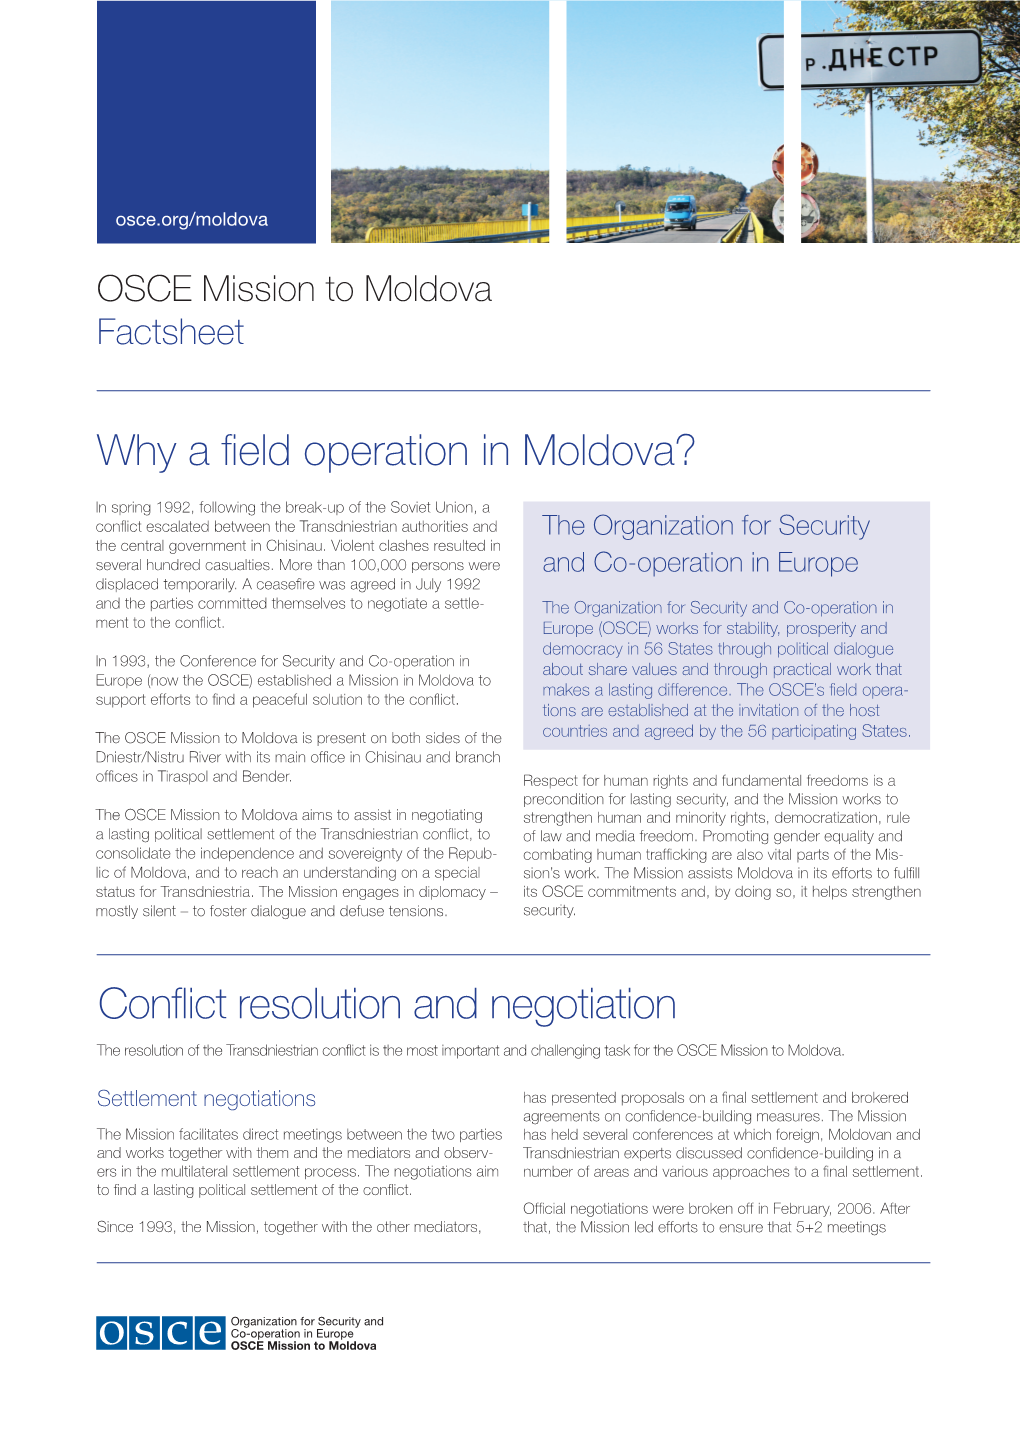 Why a Field Operation in Moldova? Conflict Resolution and Negotiation